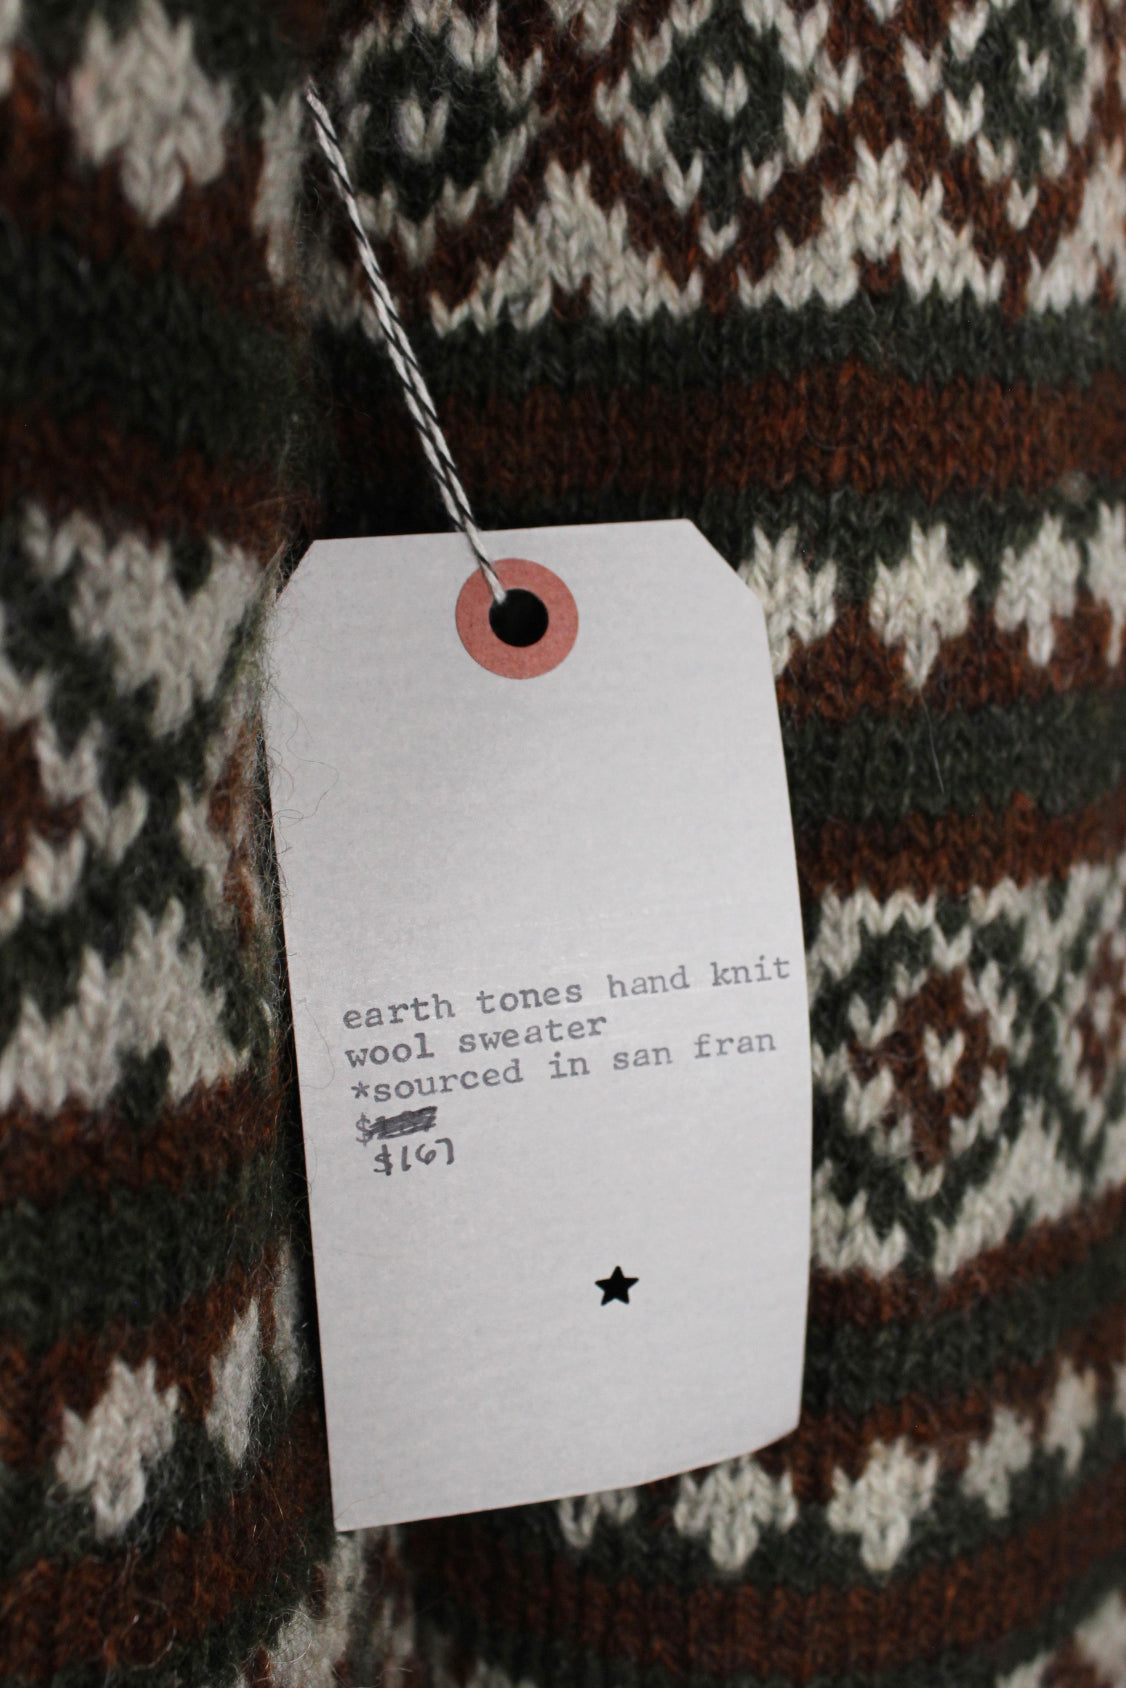 detail view of 'earth tones hand knit wool sweater *souced in san fran $167' price tag on sweater.